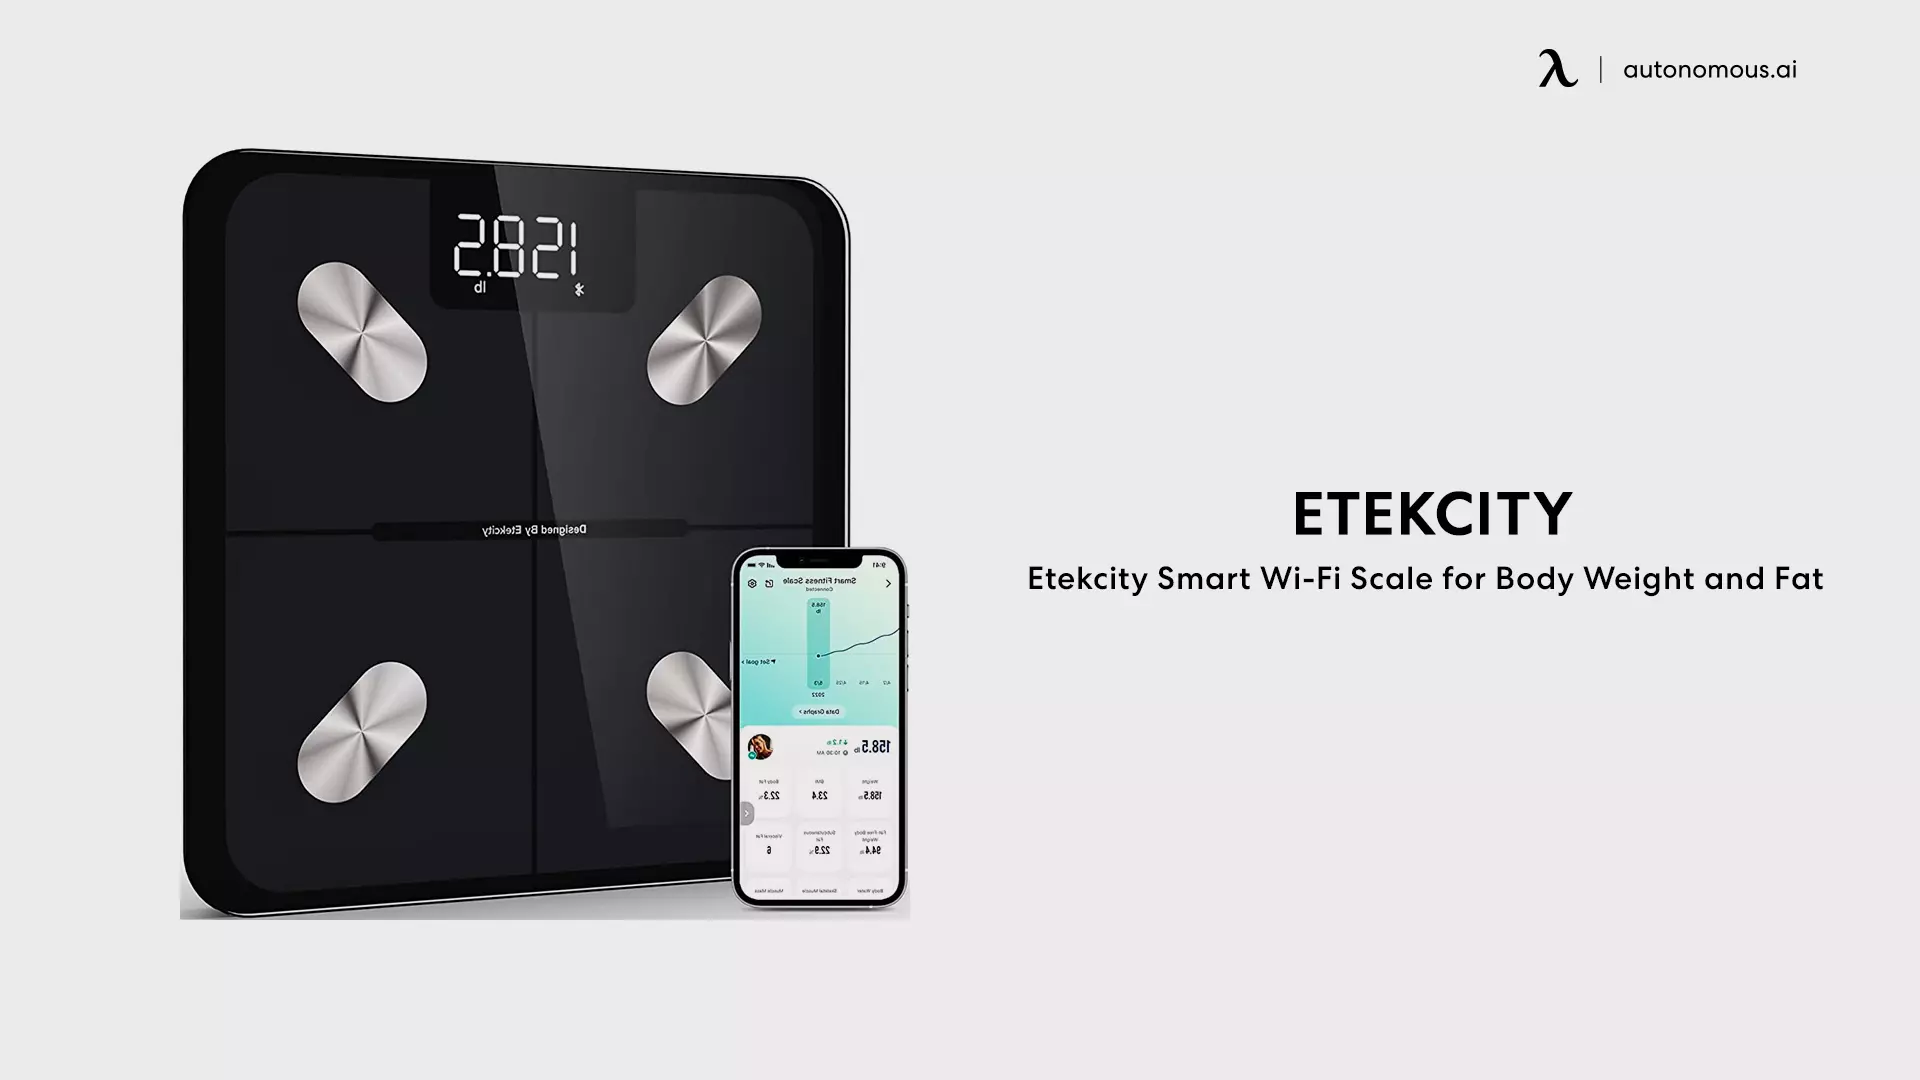 Etekcity Smart Wi-Fi Scale for Body Weight and Fat